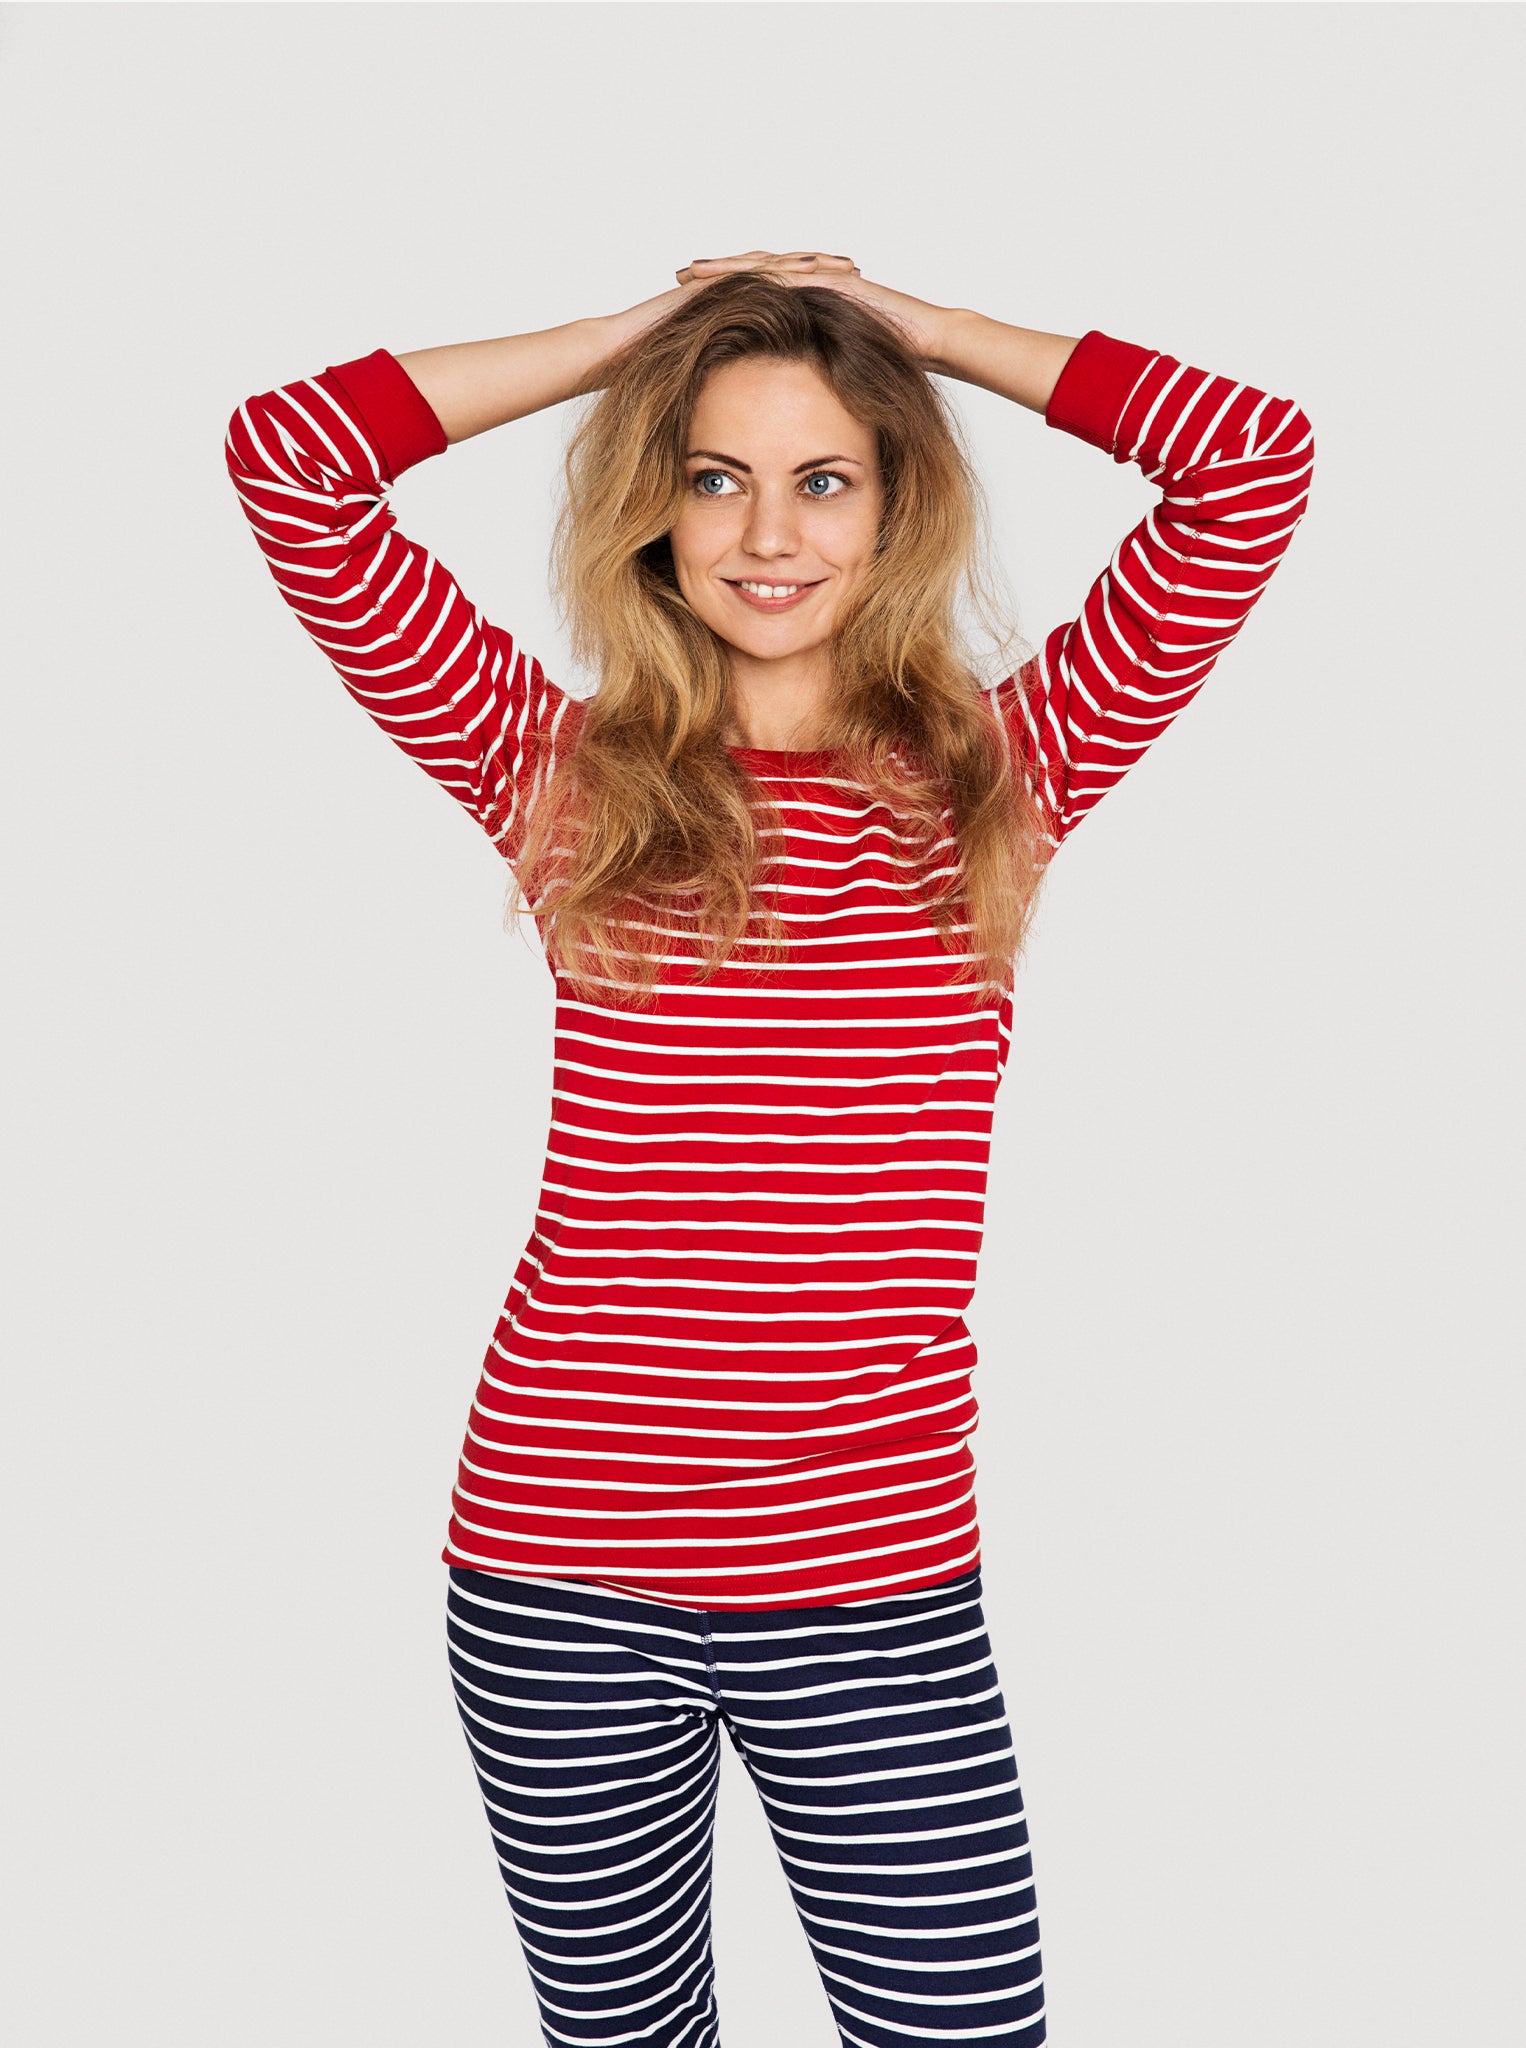 women wearing PO.P classic red and navy striped leggings and t-shirt